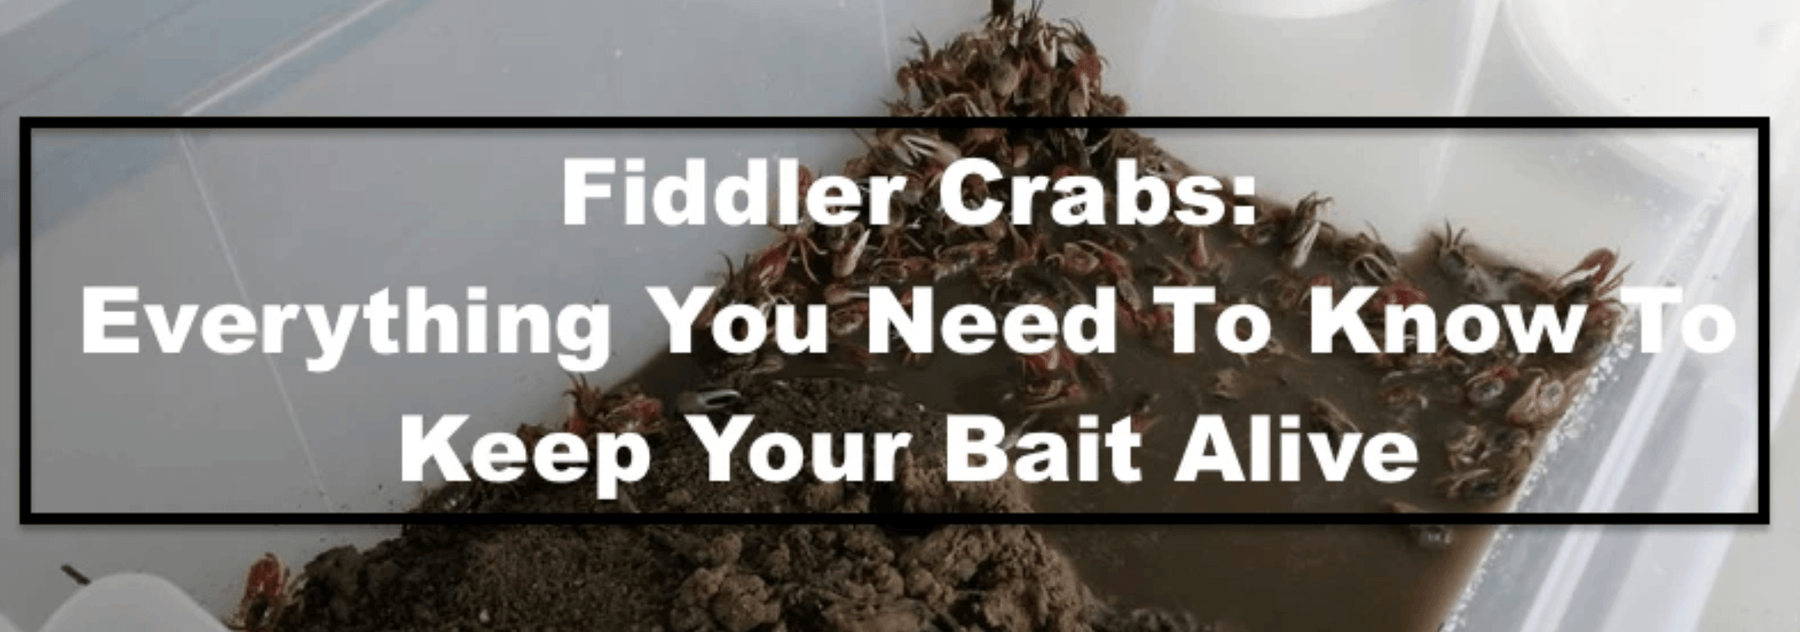 Fiddler Crabs: Everything you need to know to keep your bait alive